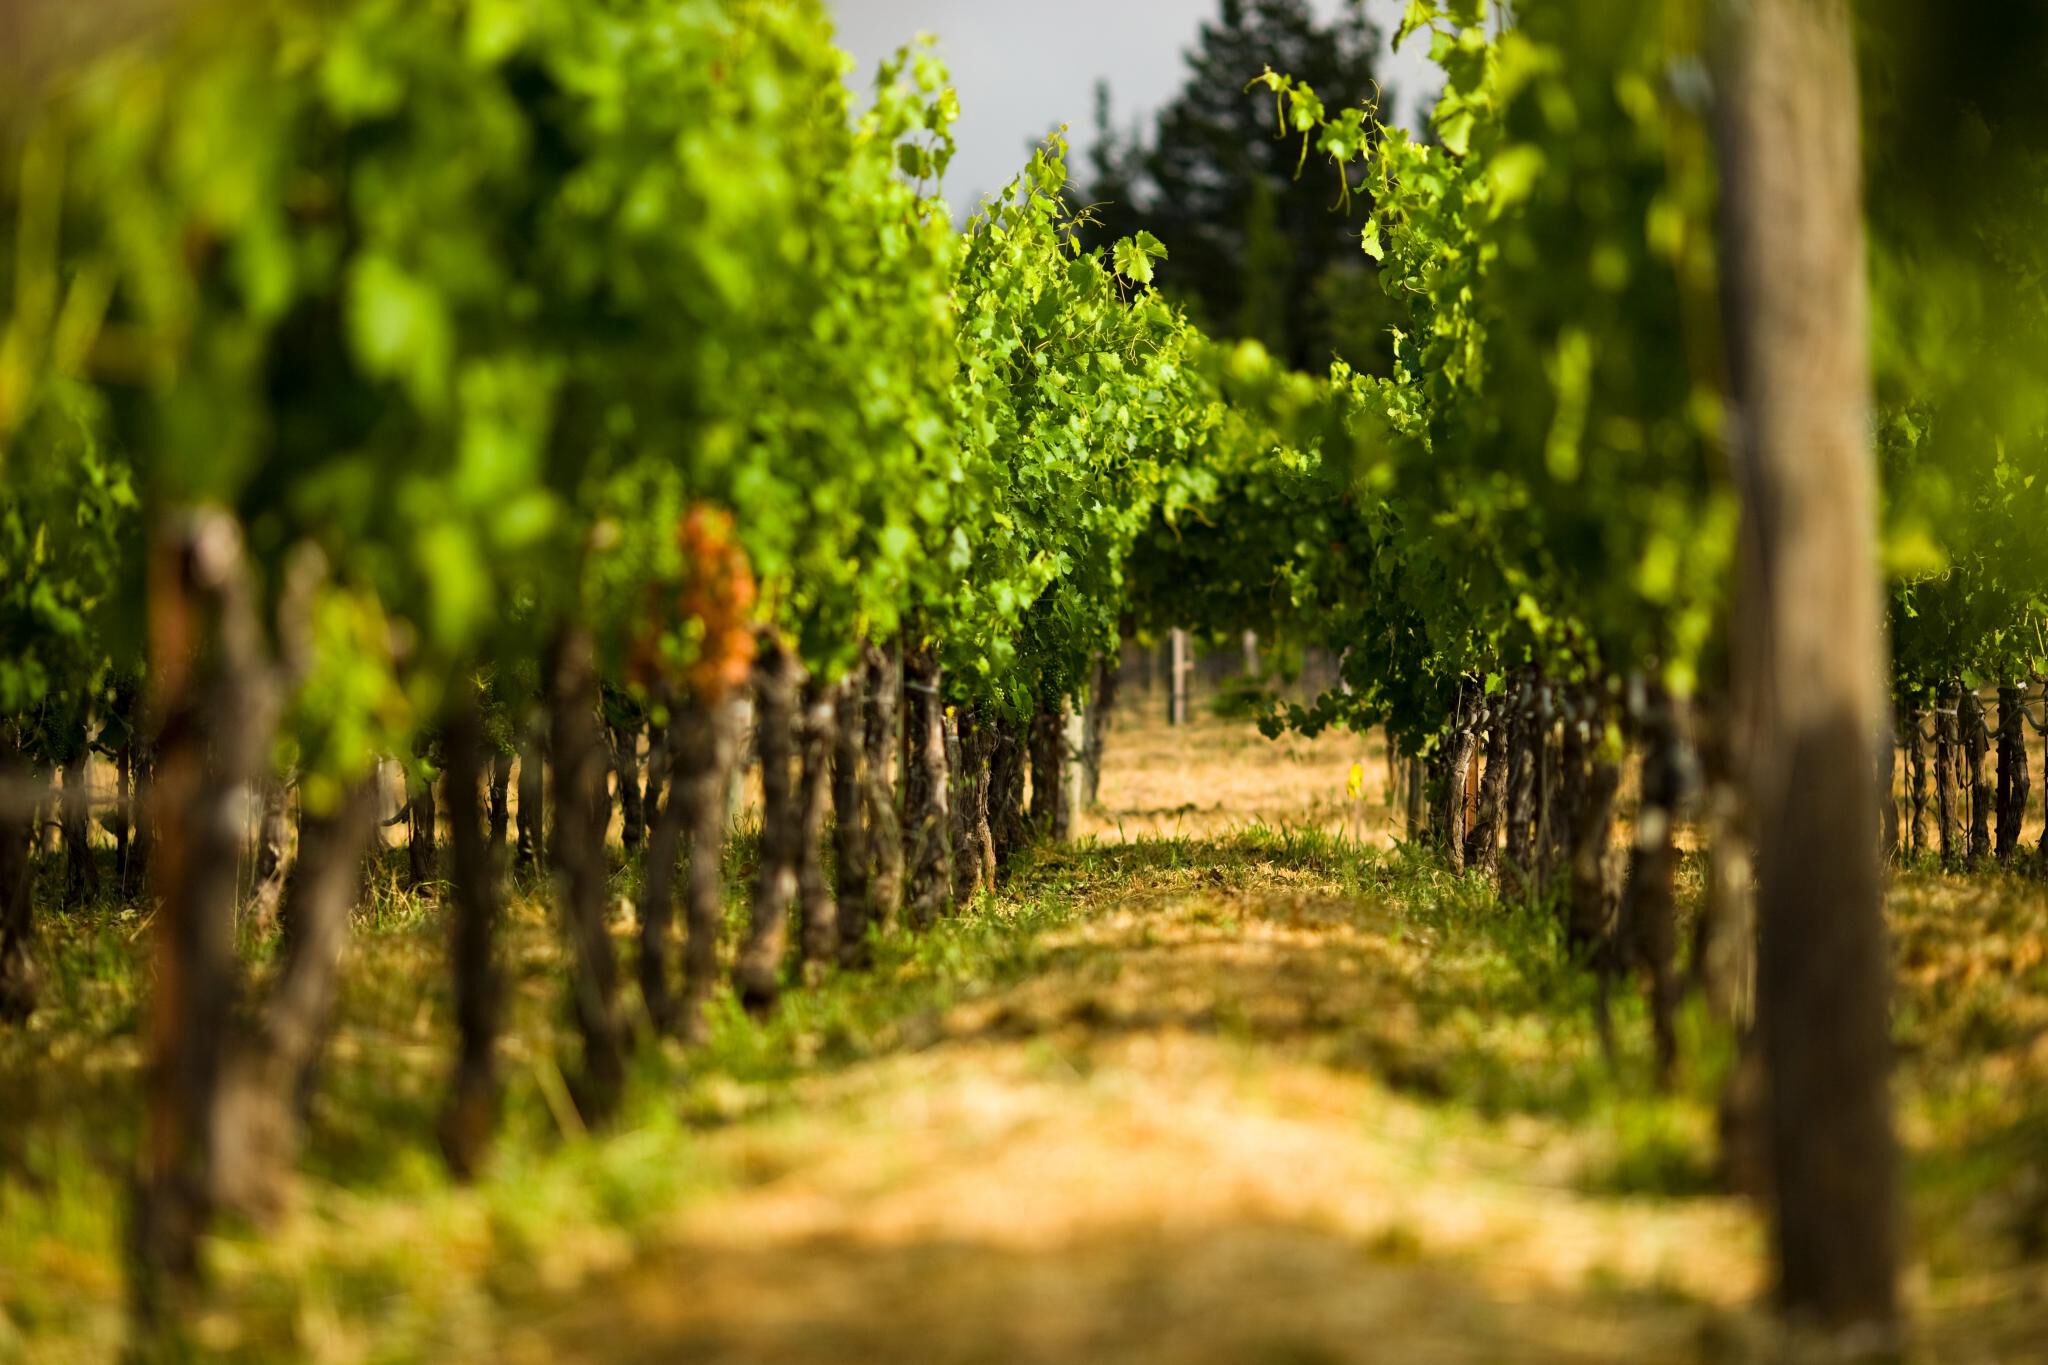 DRY FARMING IS GOOD FOR THE EARTH & GOOD FOR WINE